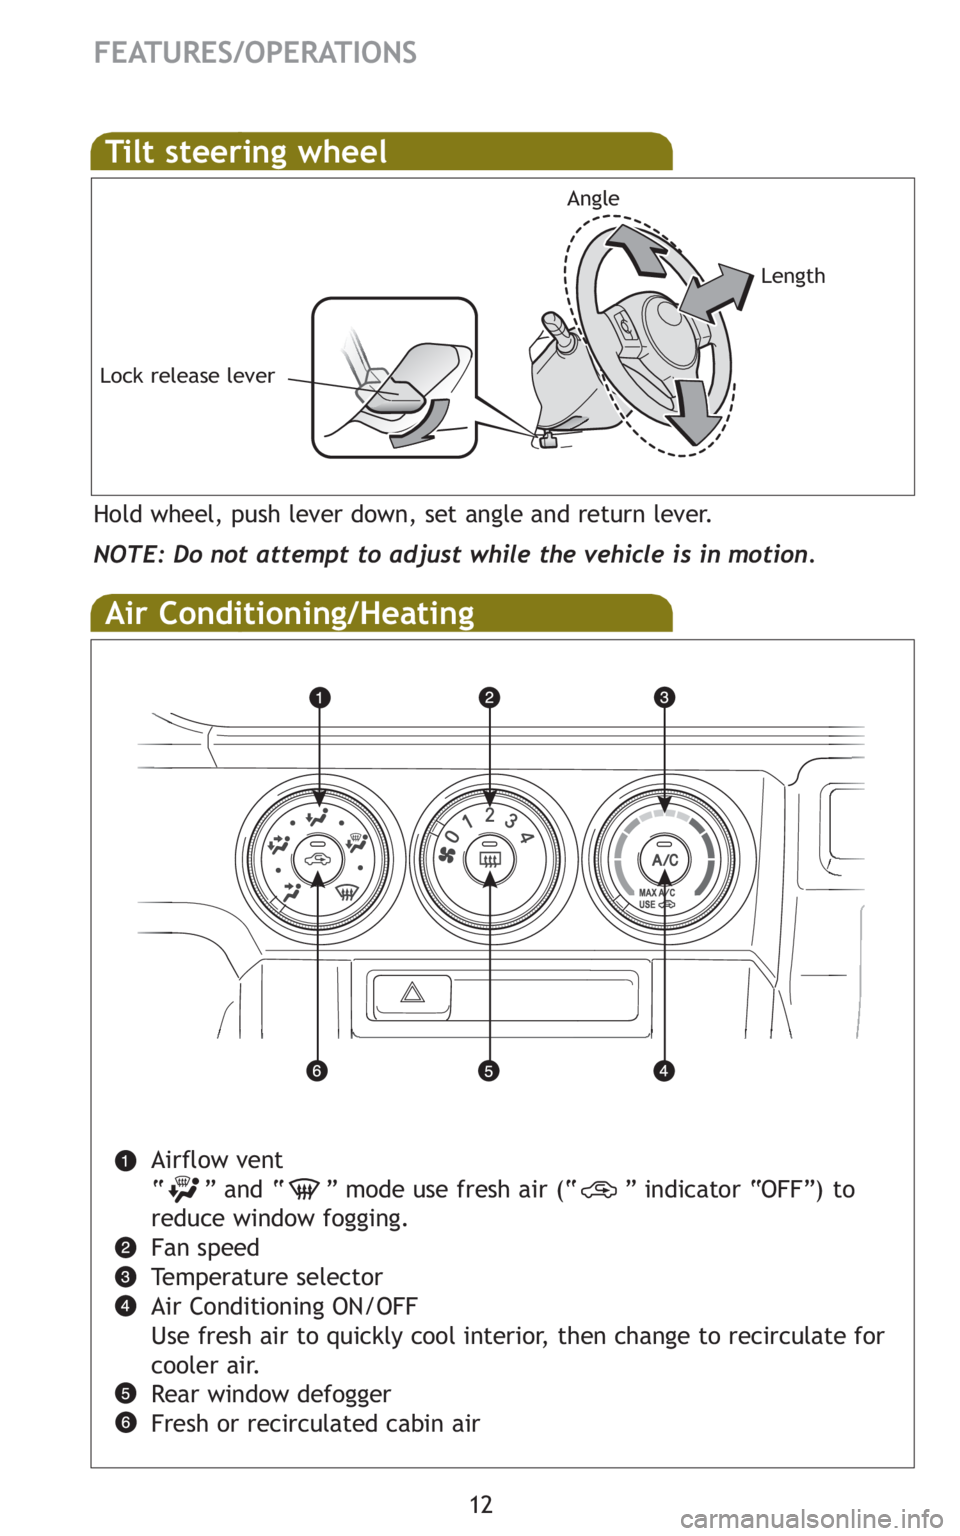 TOYOTA xB 2011   (in English) User Guide 12
FEATURES/OPERATIONS
Air Conditioning/Heating
Airflow vent
“ ” and “ ” mode use fresh air (“ ” indicator “OFF”) to
reduce window fogging.
Fan speed
Temperature selector
Air Condition